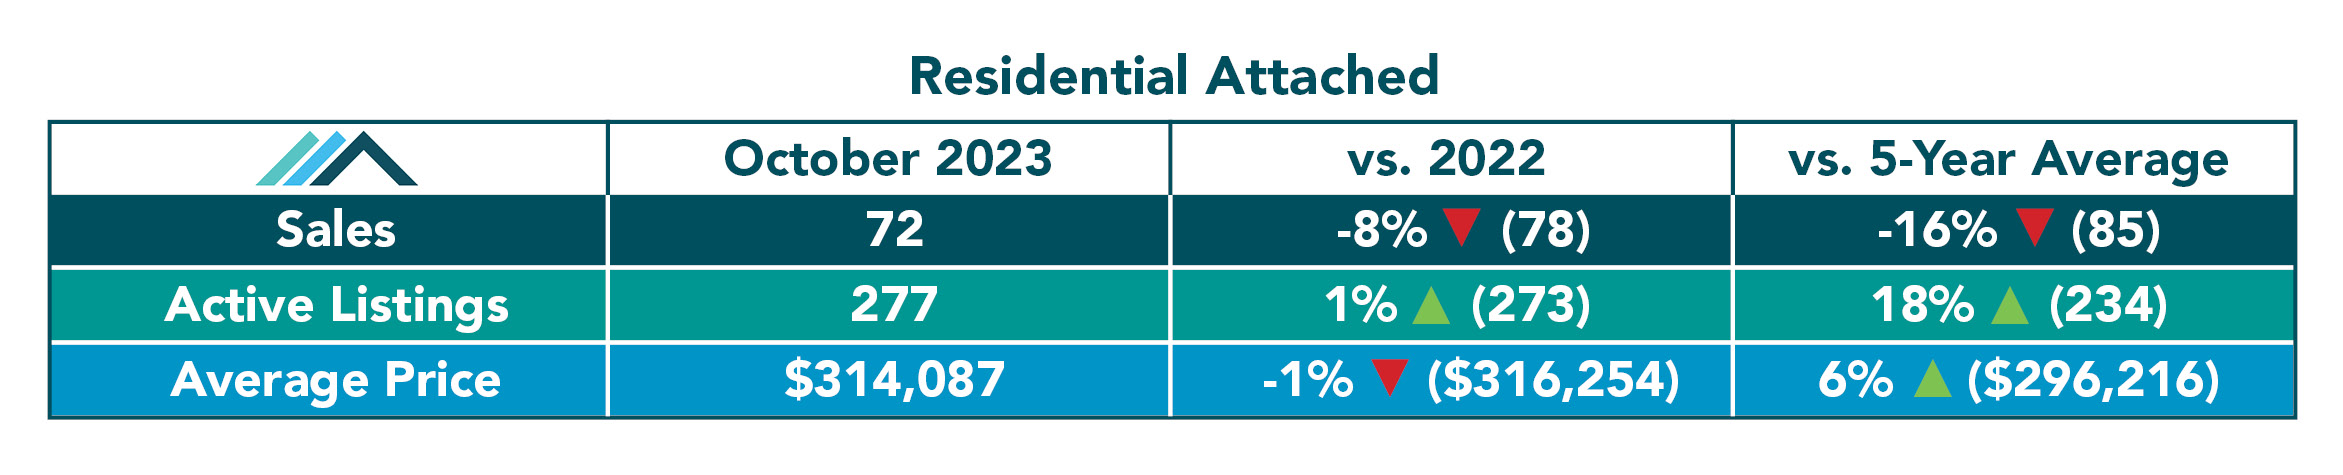 Residential Detached Attached and Condominium Tables October 20233.jpg (241 KB)